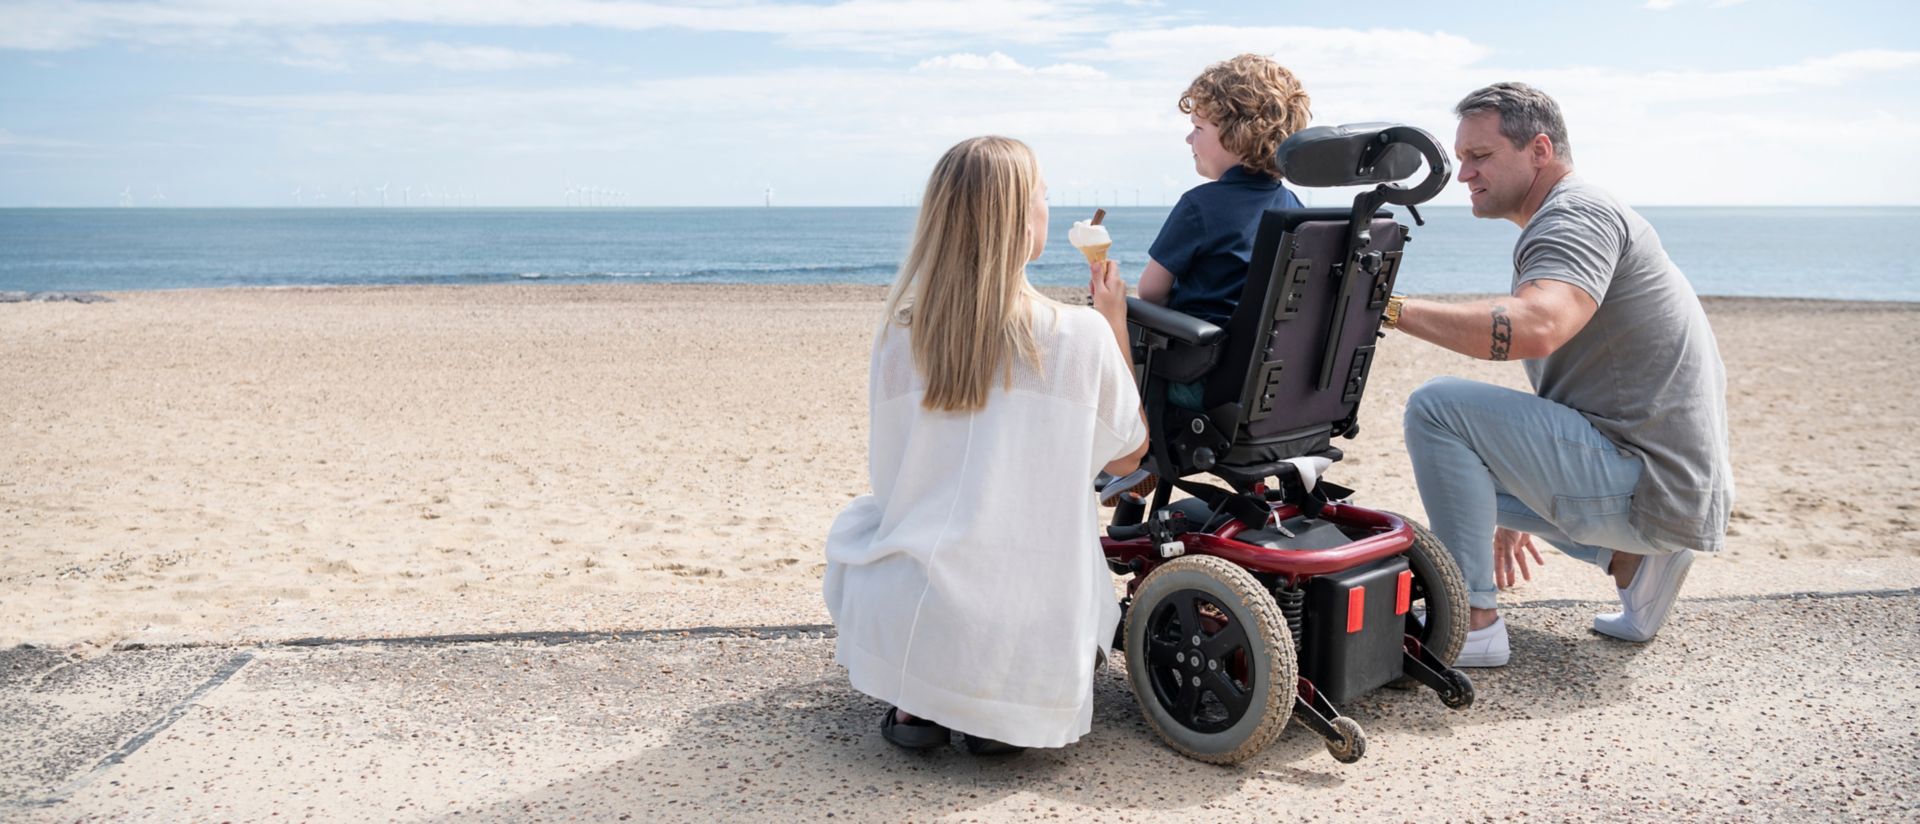 Parents crouching by son in wheelchair at beach